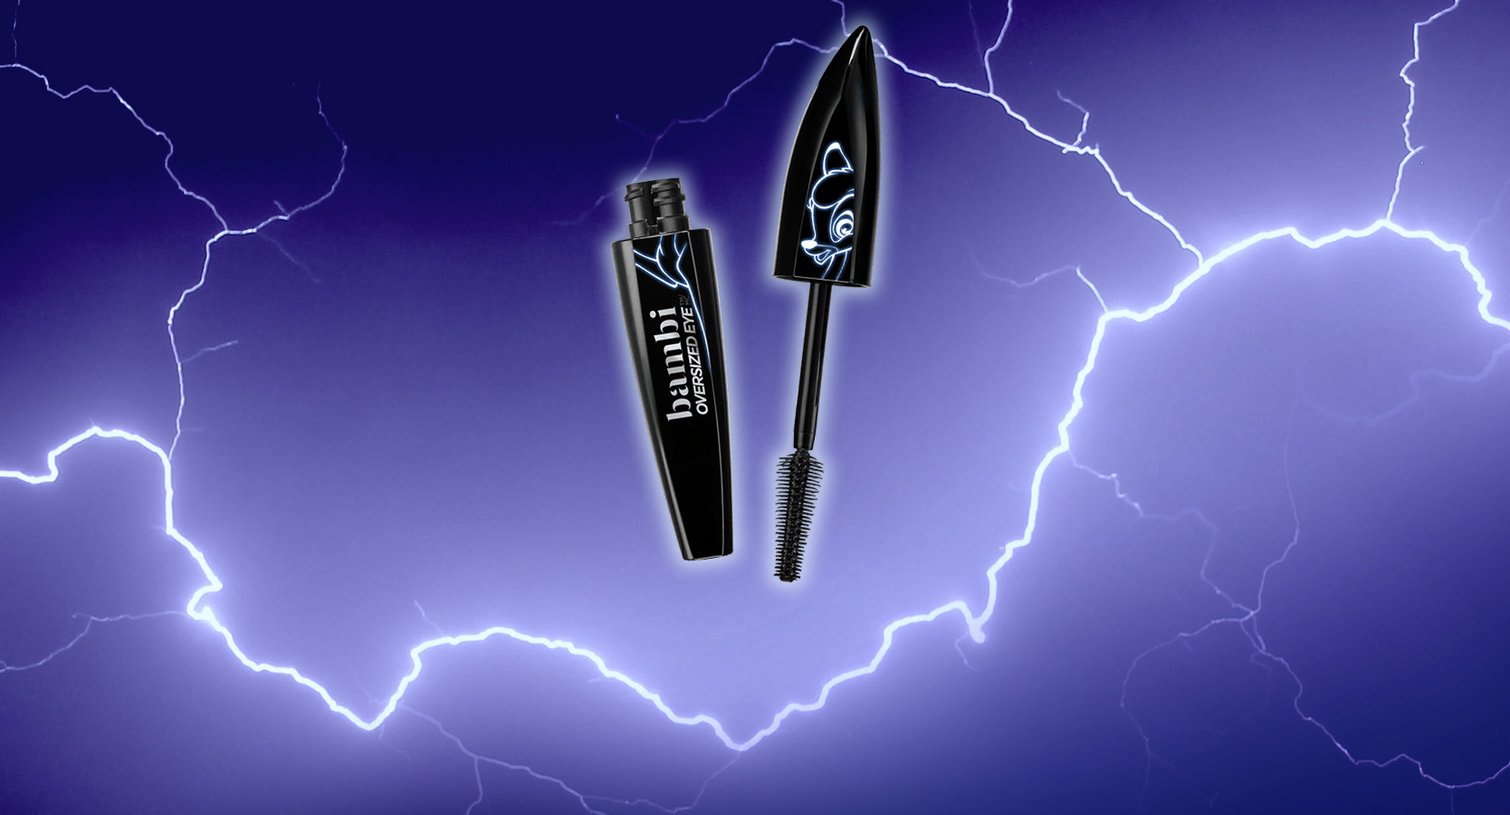 Longwear L Oreal Paris Makeup Products To Use On Halloween Slide03 Bmag